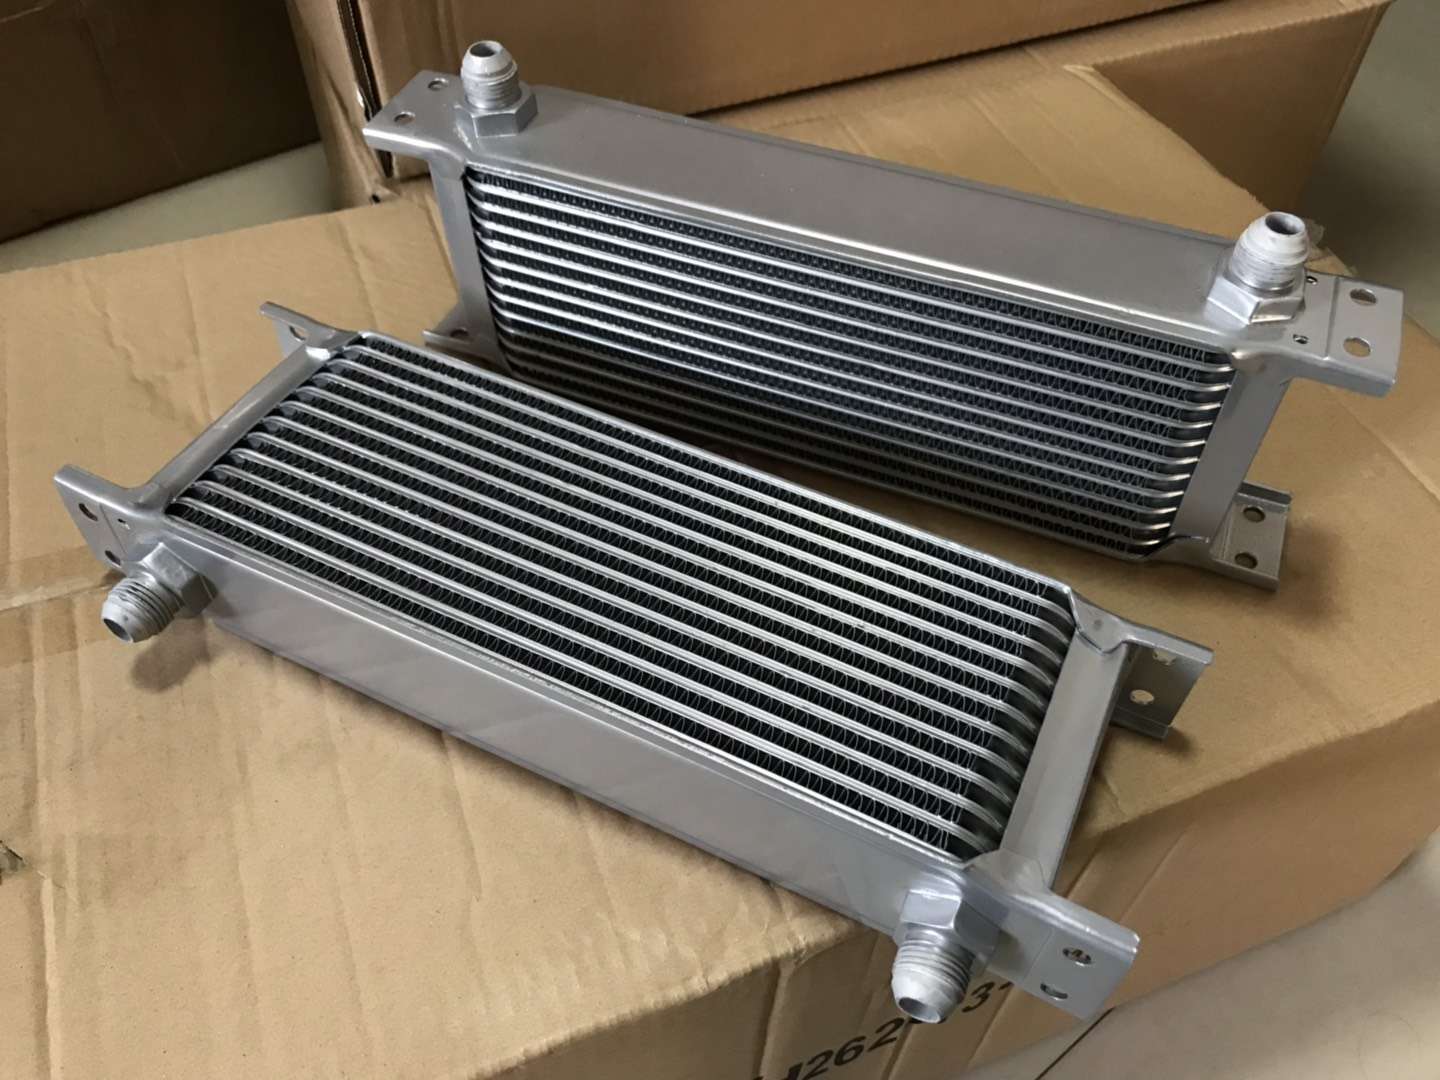 The working principle of oil cooler